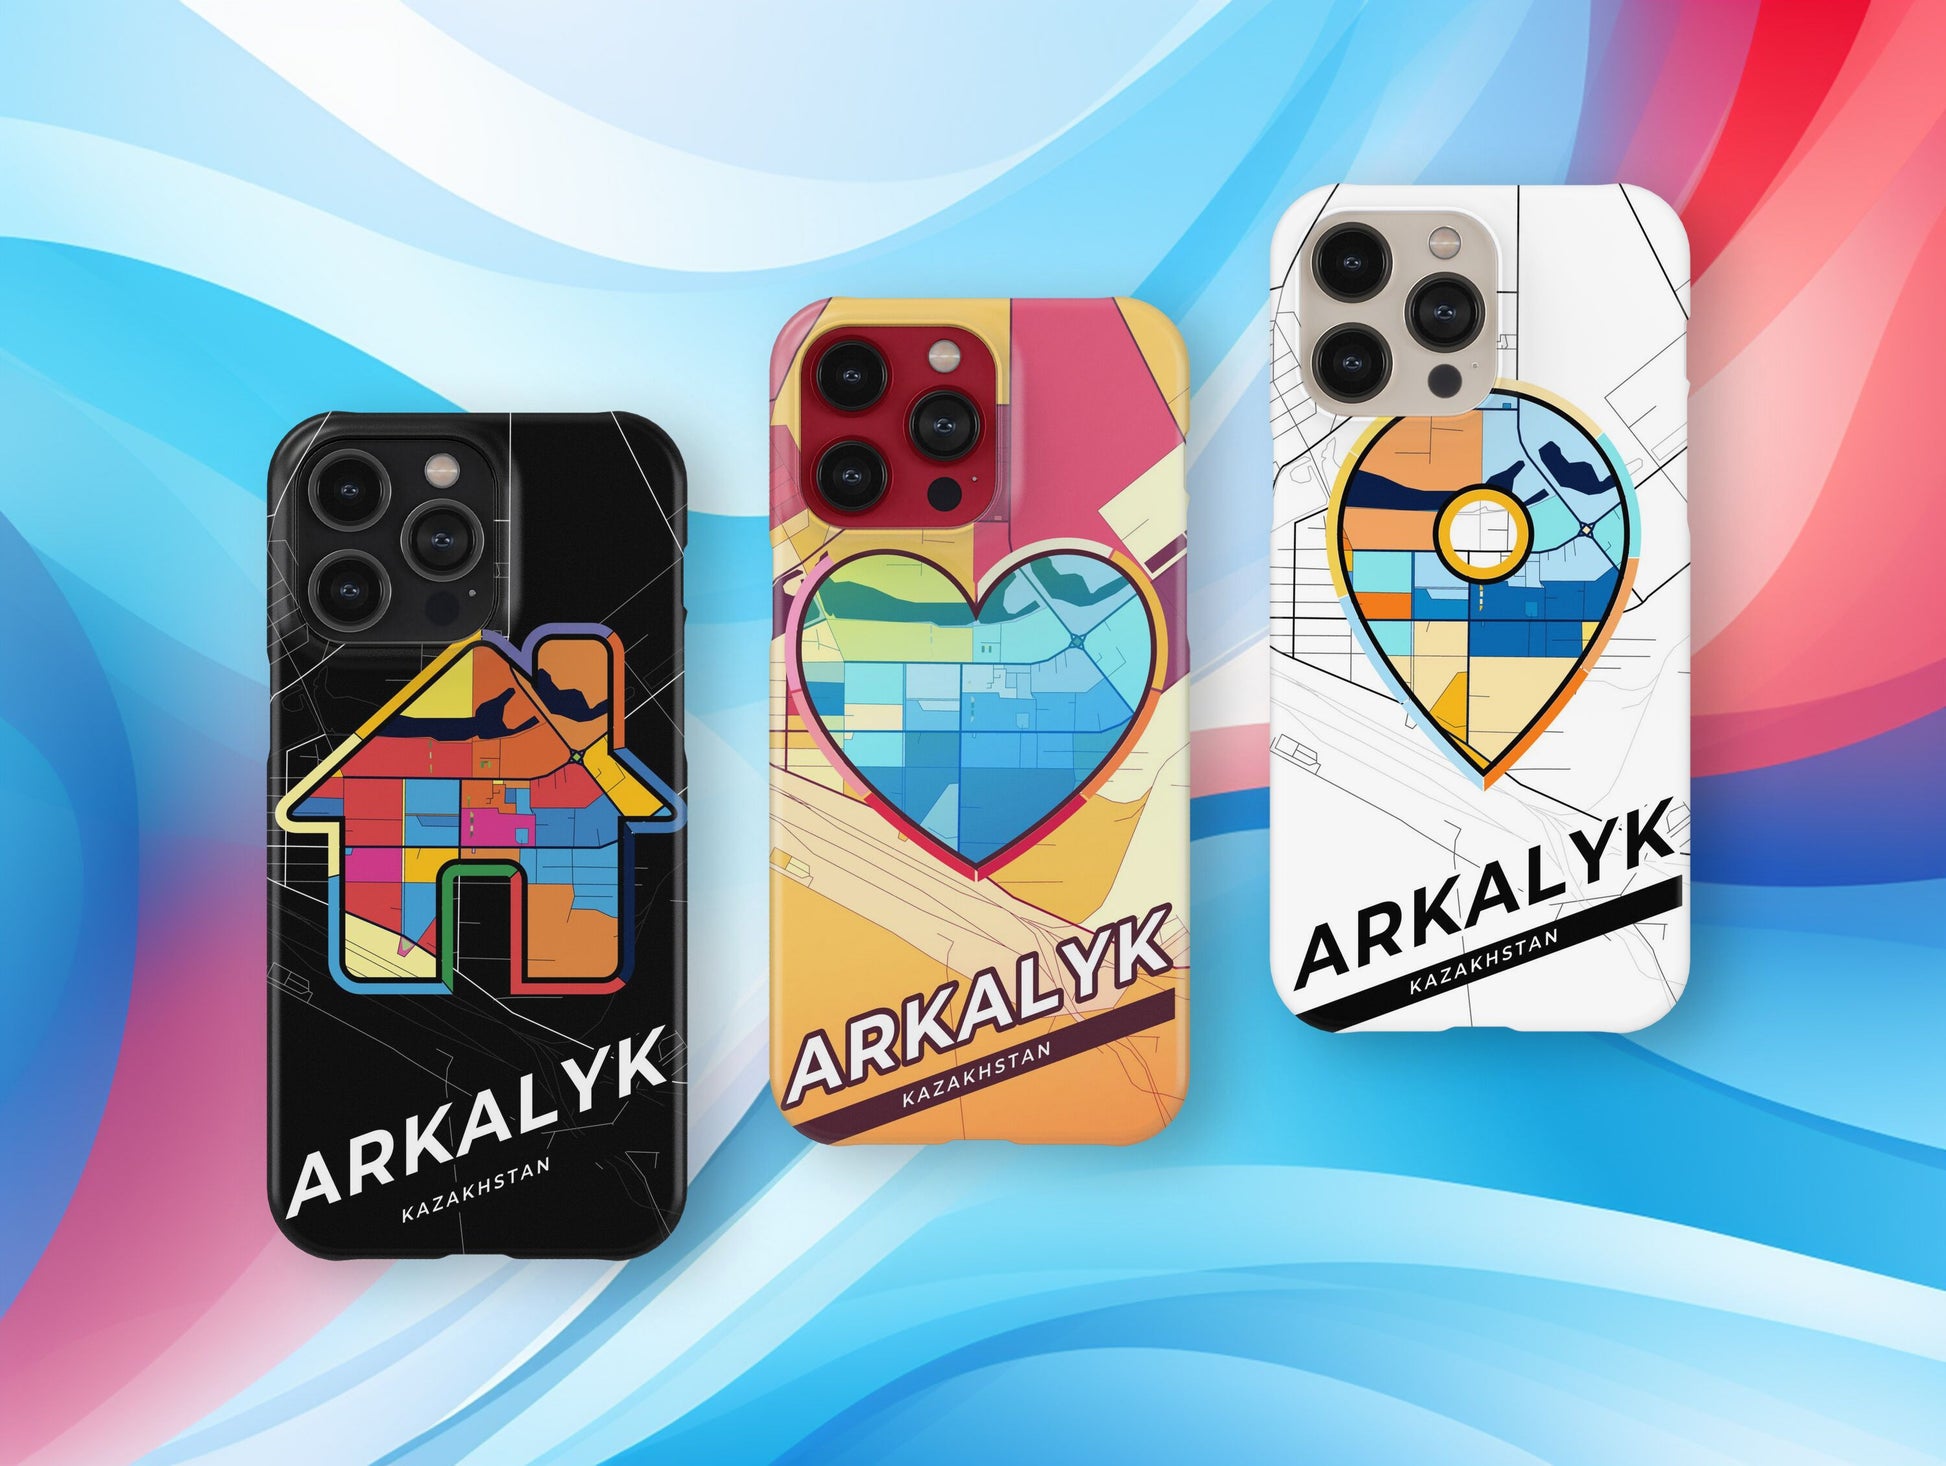 Arkalyk Kazakhstan slim phone case with colorful icon. Birthday, wedding or housewarming gift. Couple match cases.